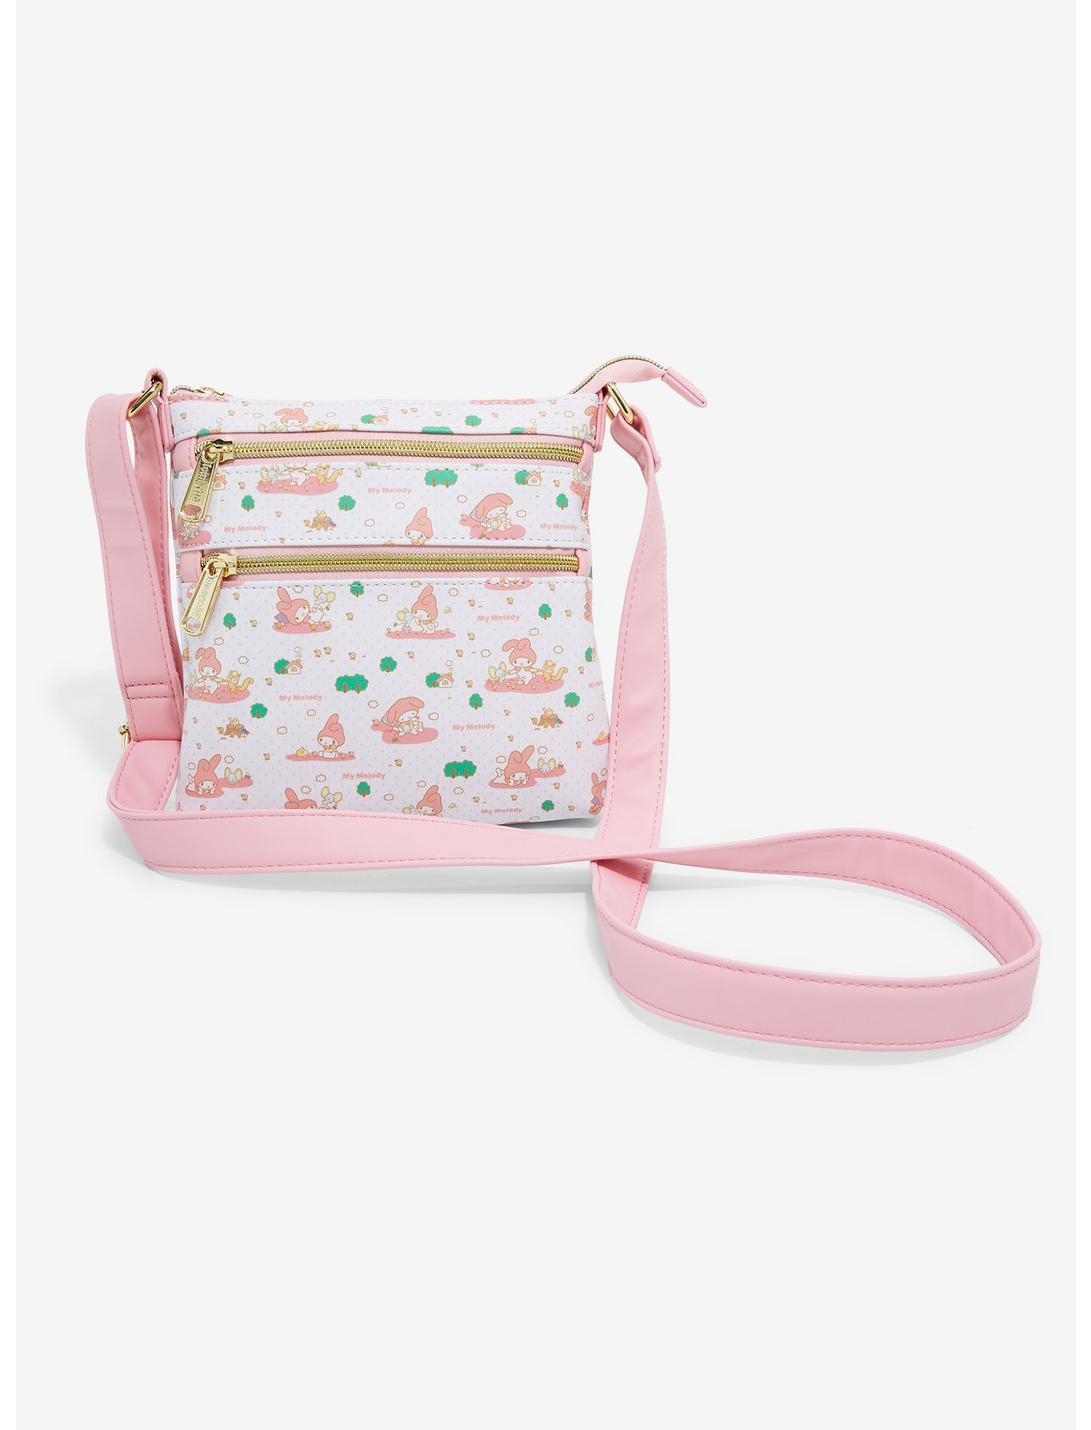 Loungefly Sanrio My Melody Allover Print Crossbody Bag - BoxLunch Exclusive, , hi-res